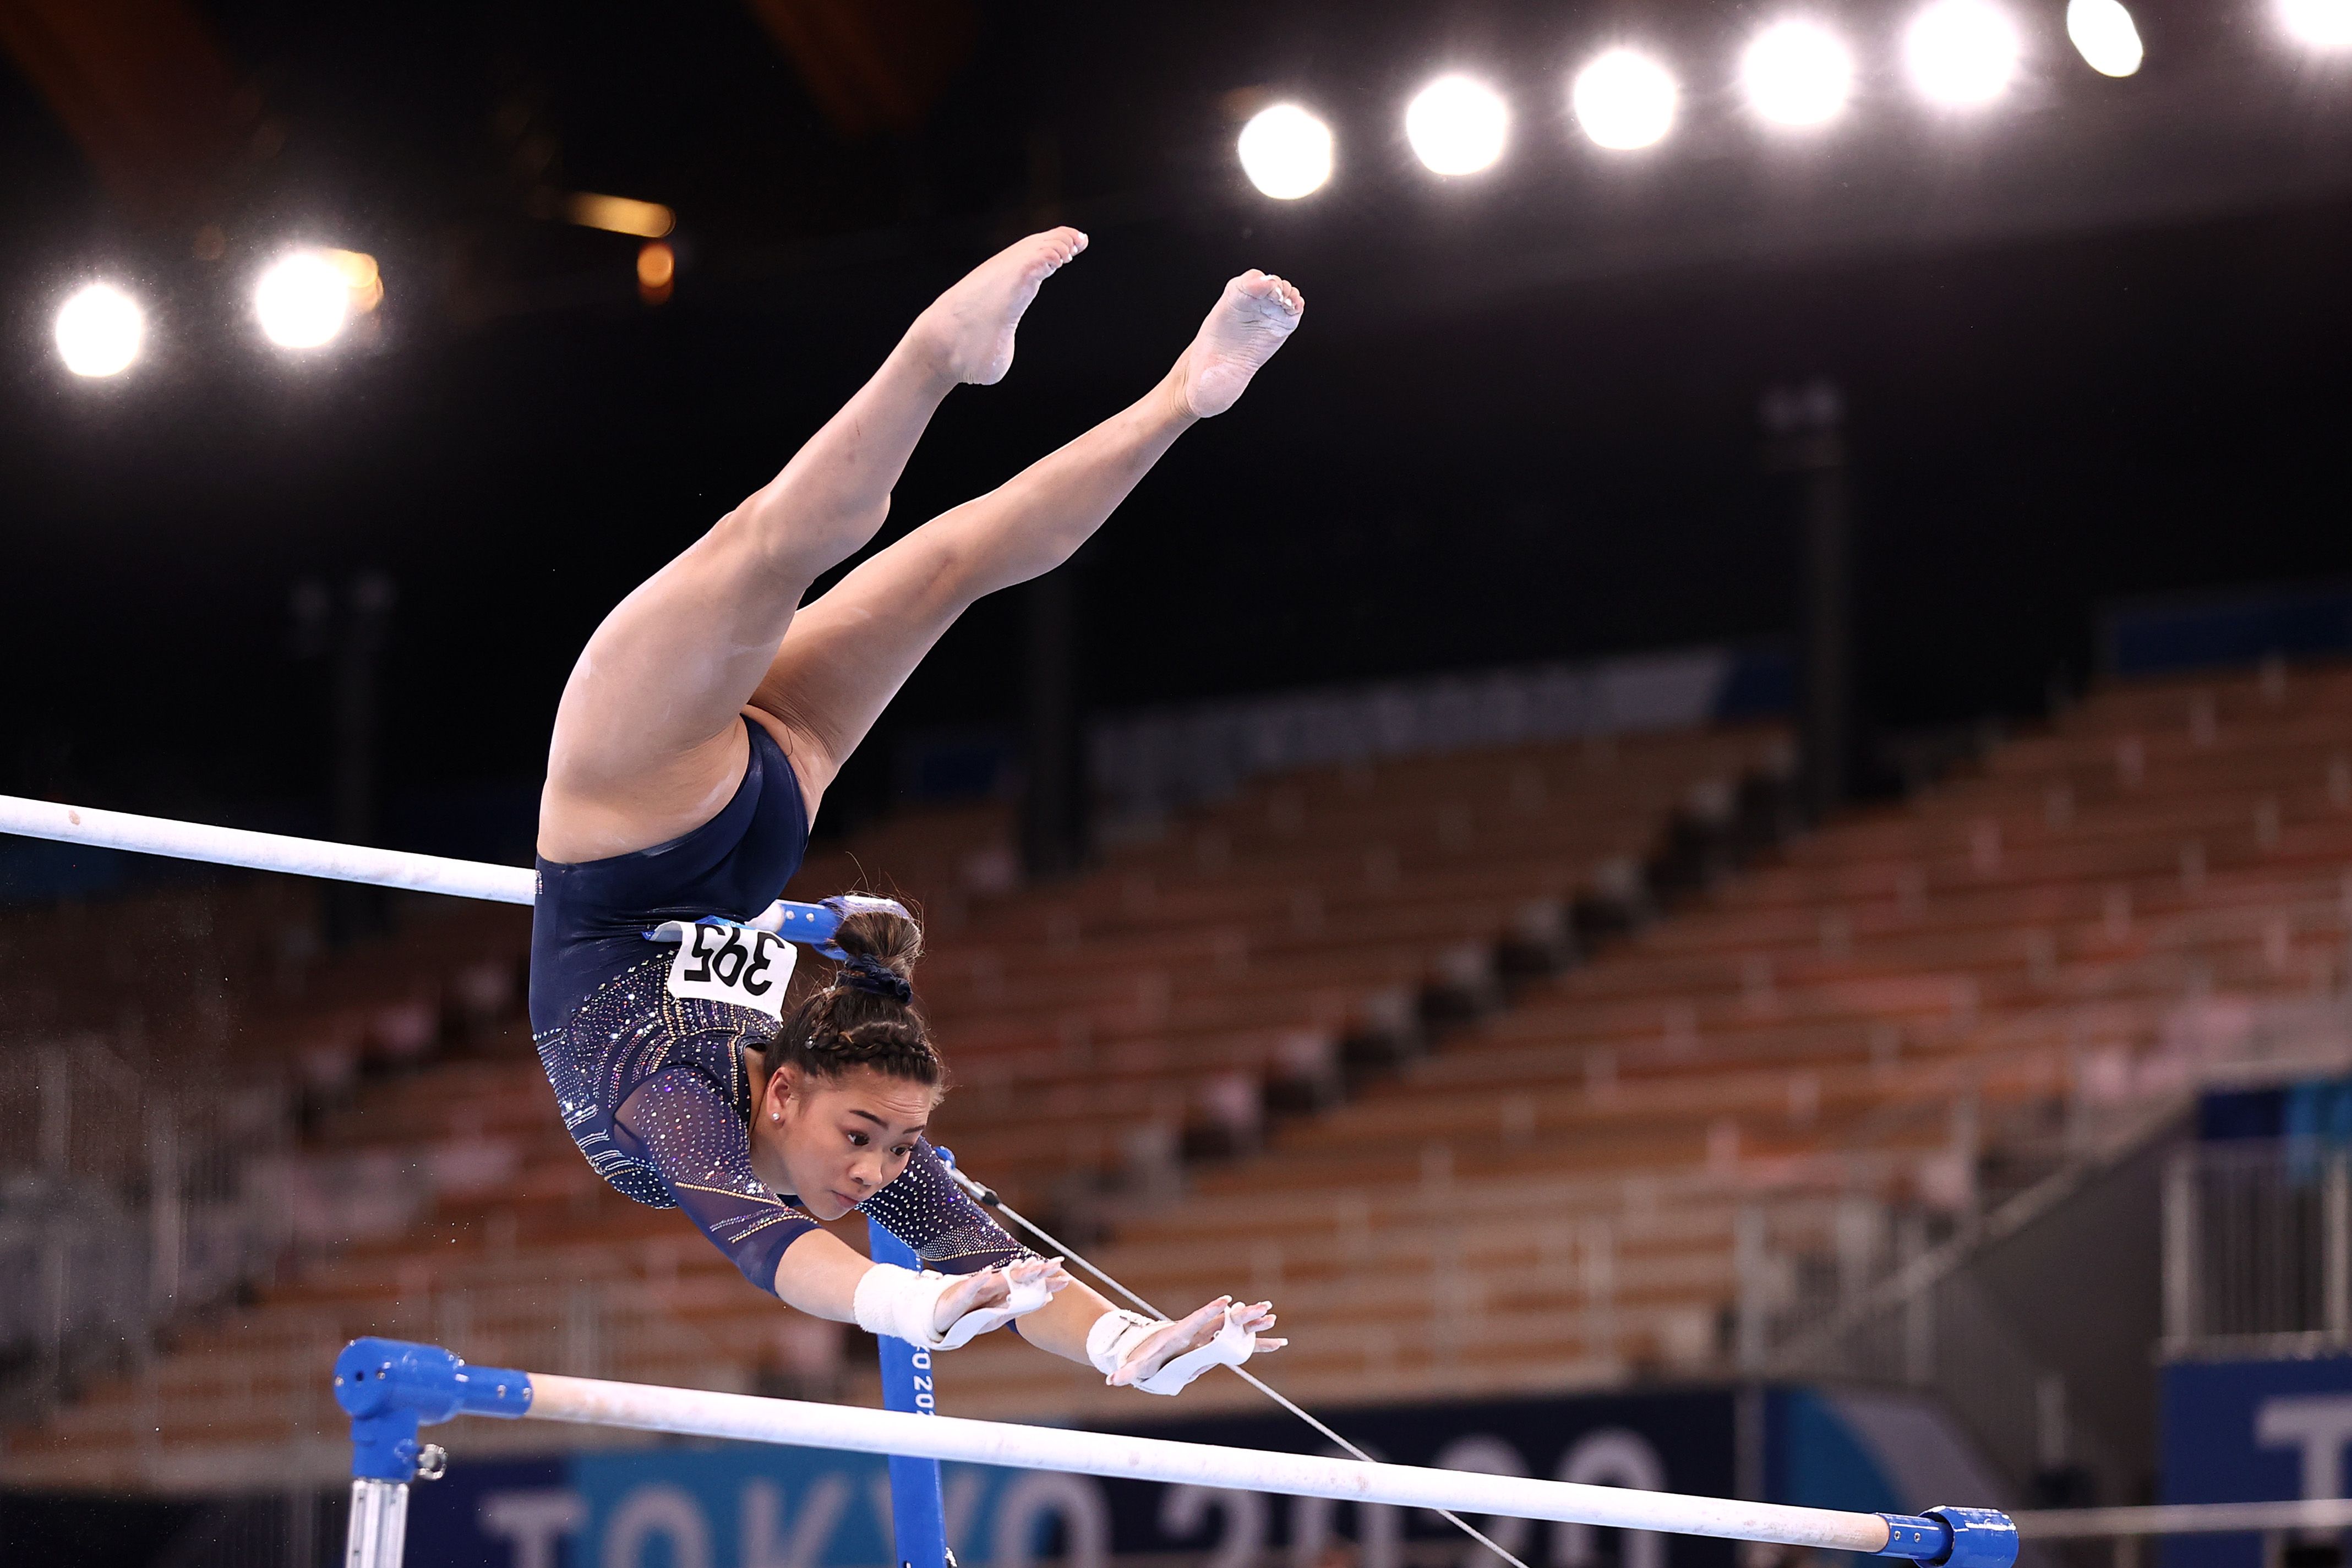 Who is Sunisa Lee? 6 Fun Facts About the . Olympic Gymnast